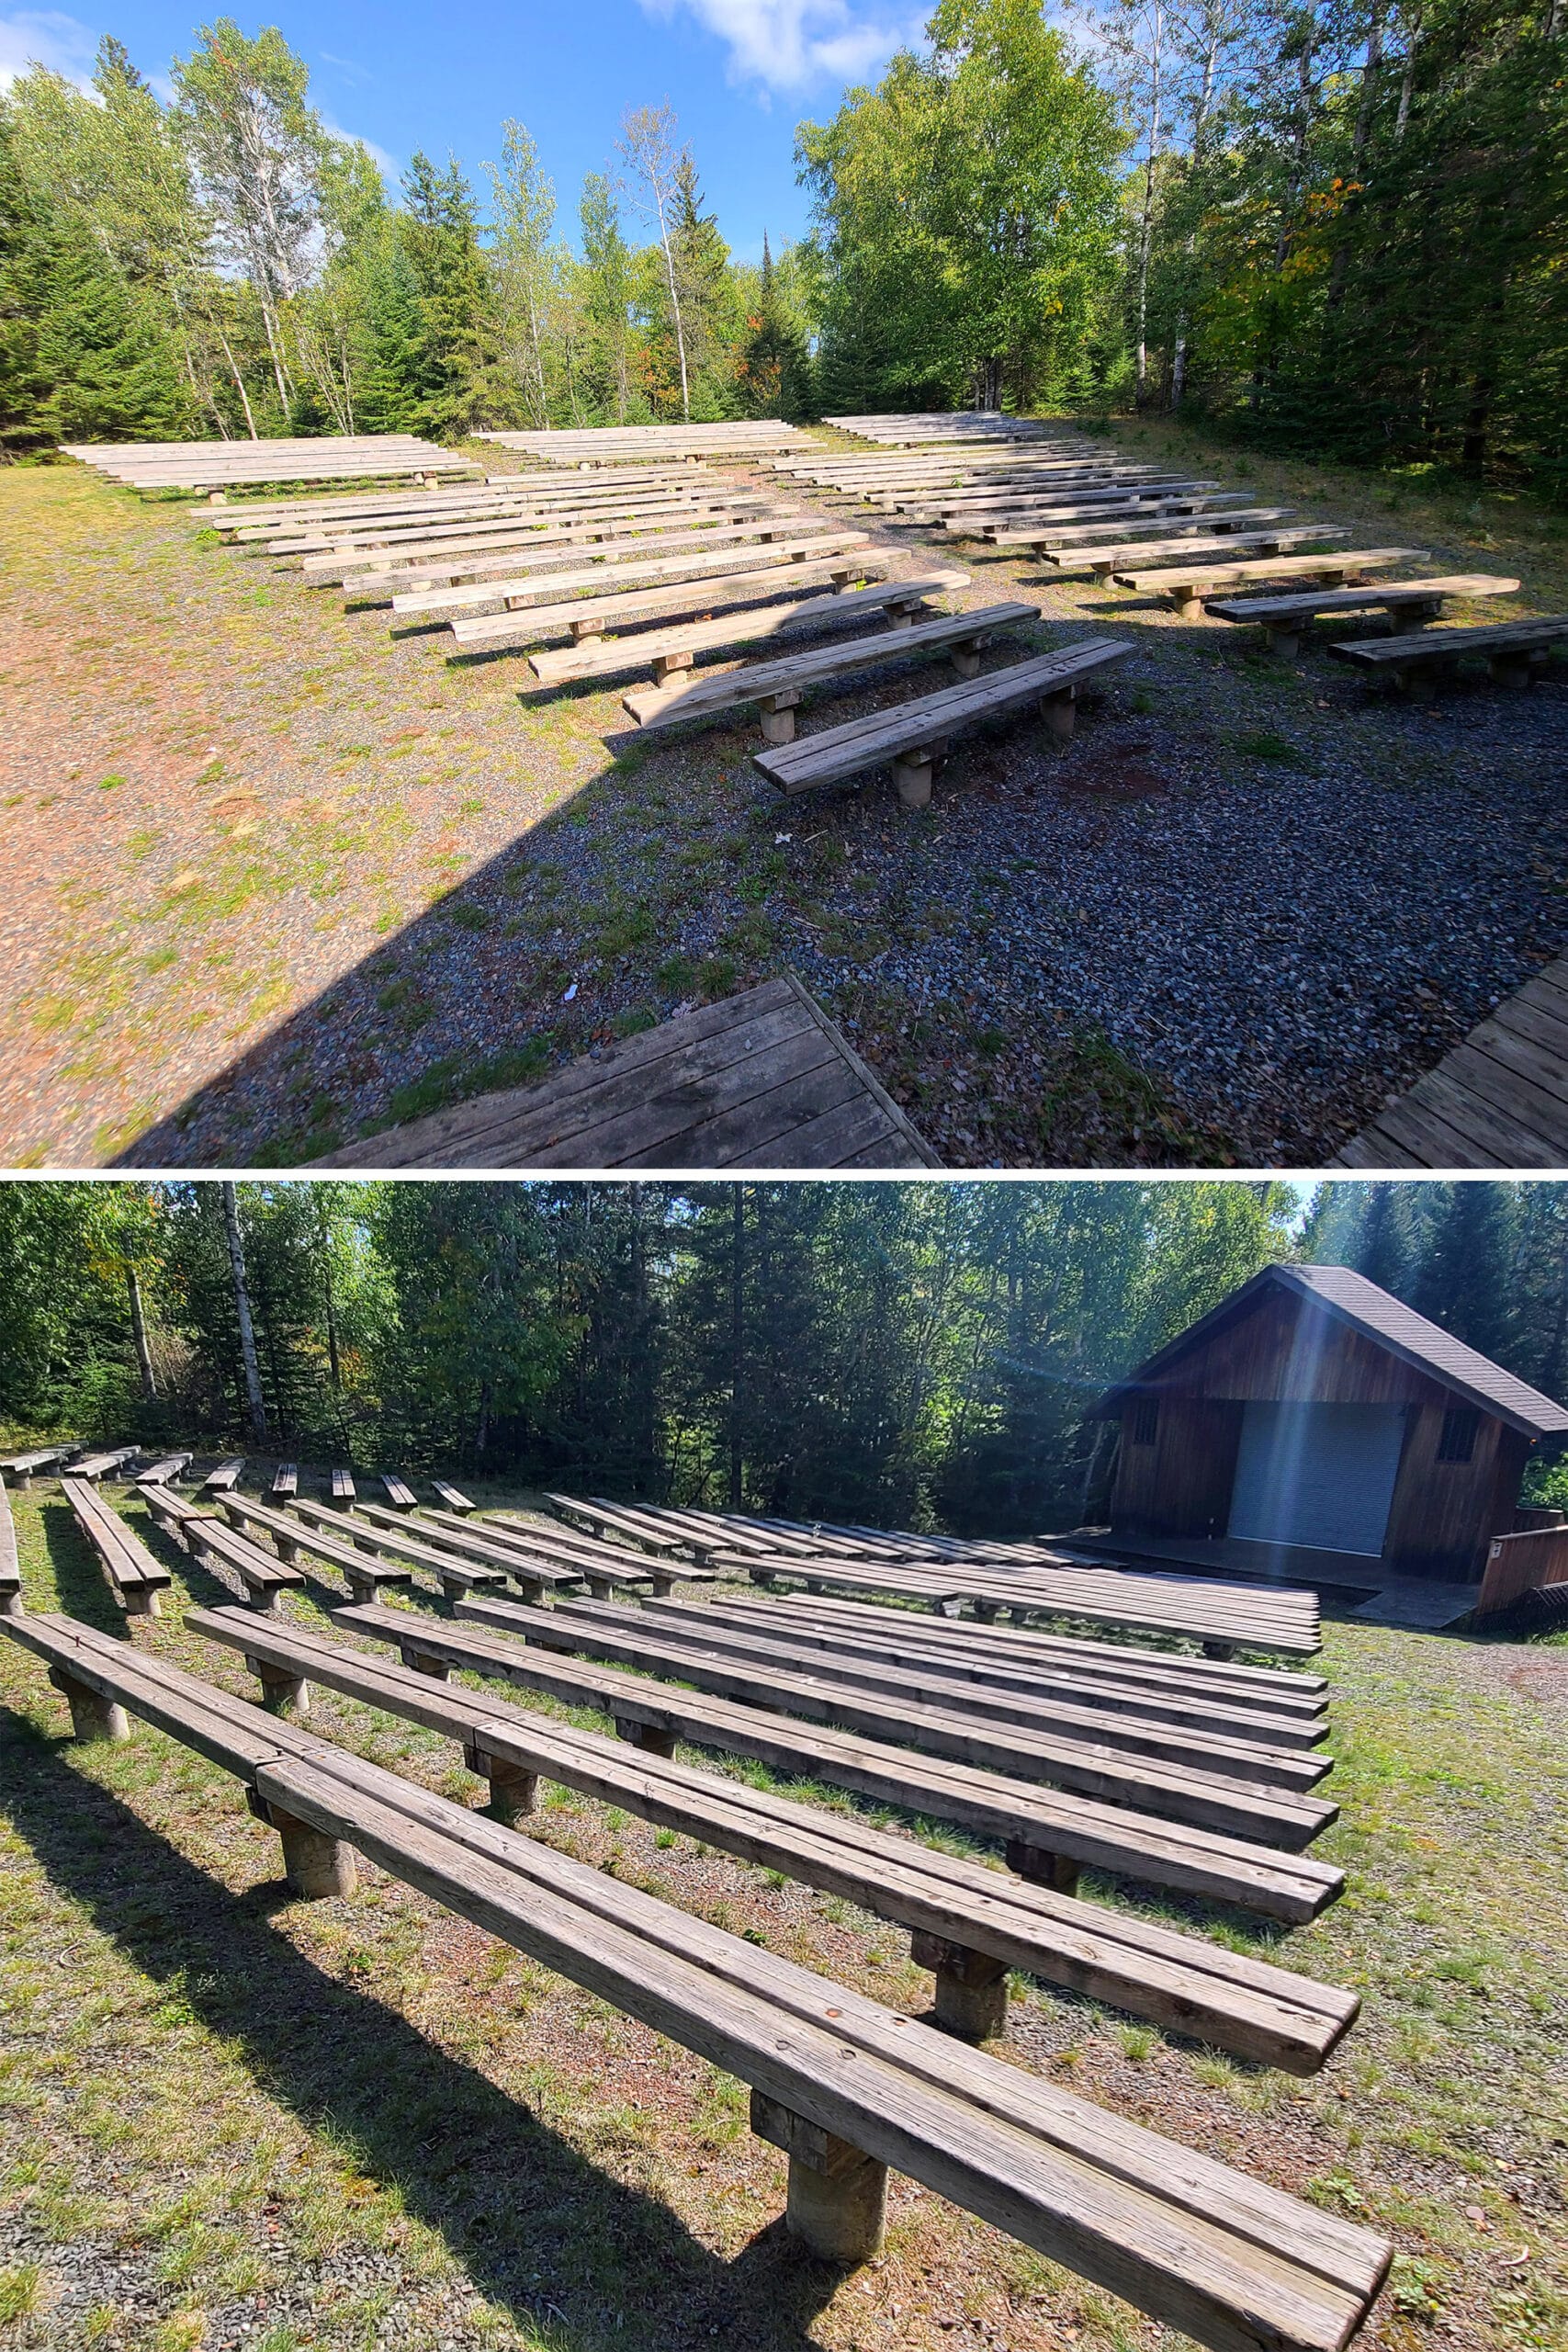 A 2 part image showing a large amphitheatre with wooden bench seats.